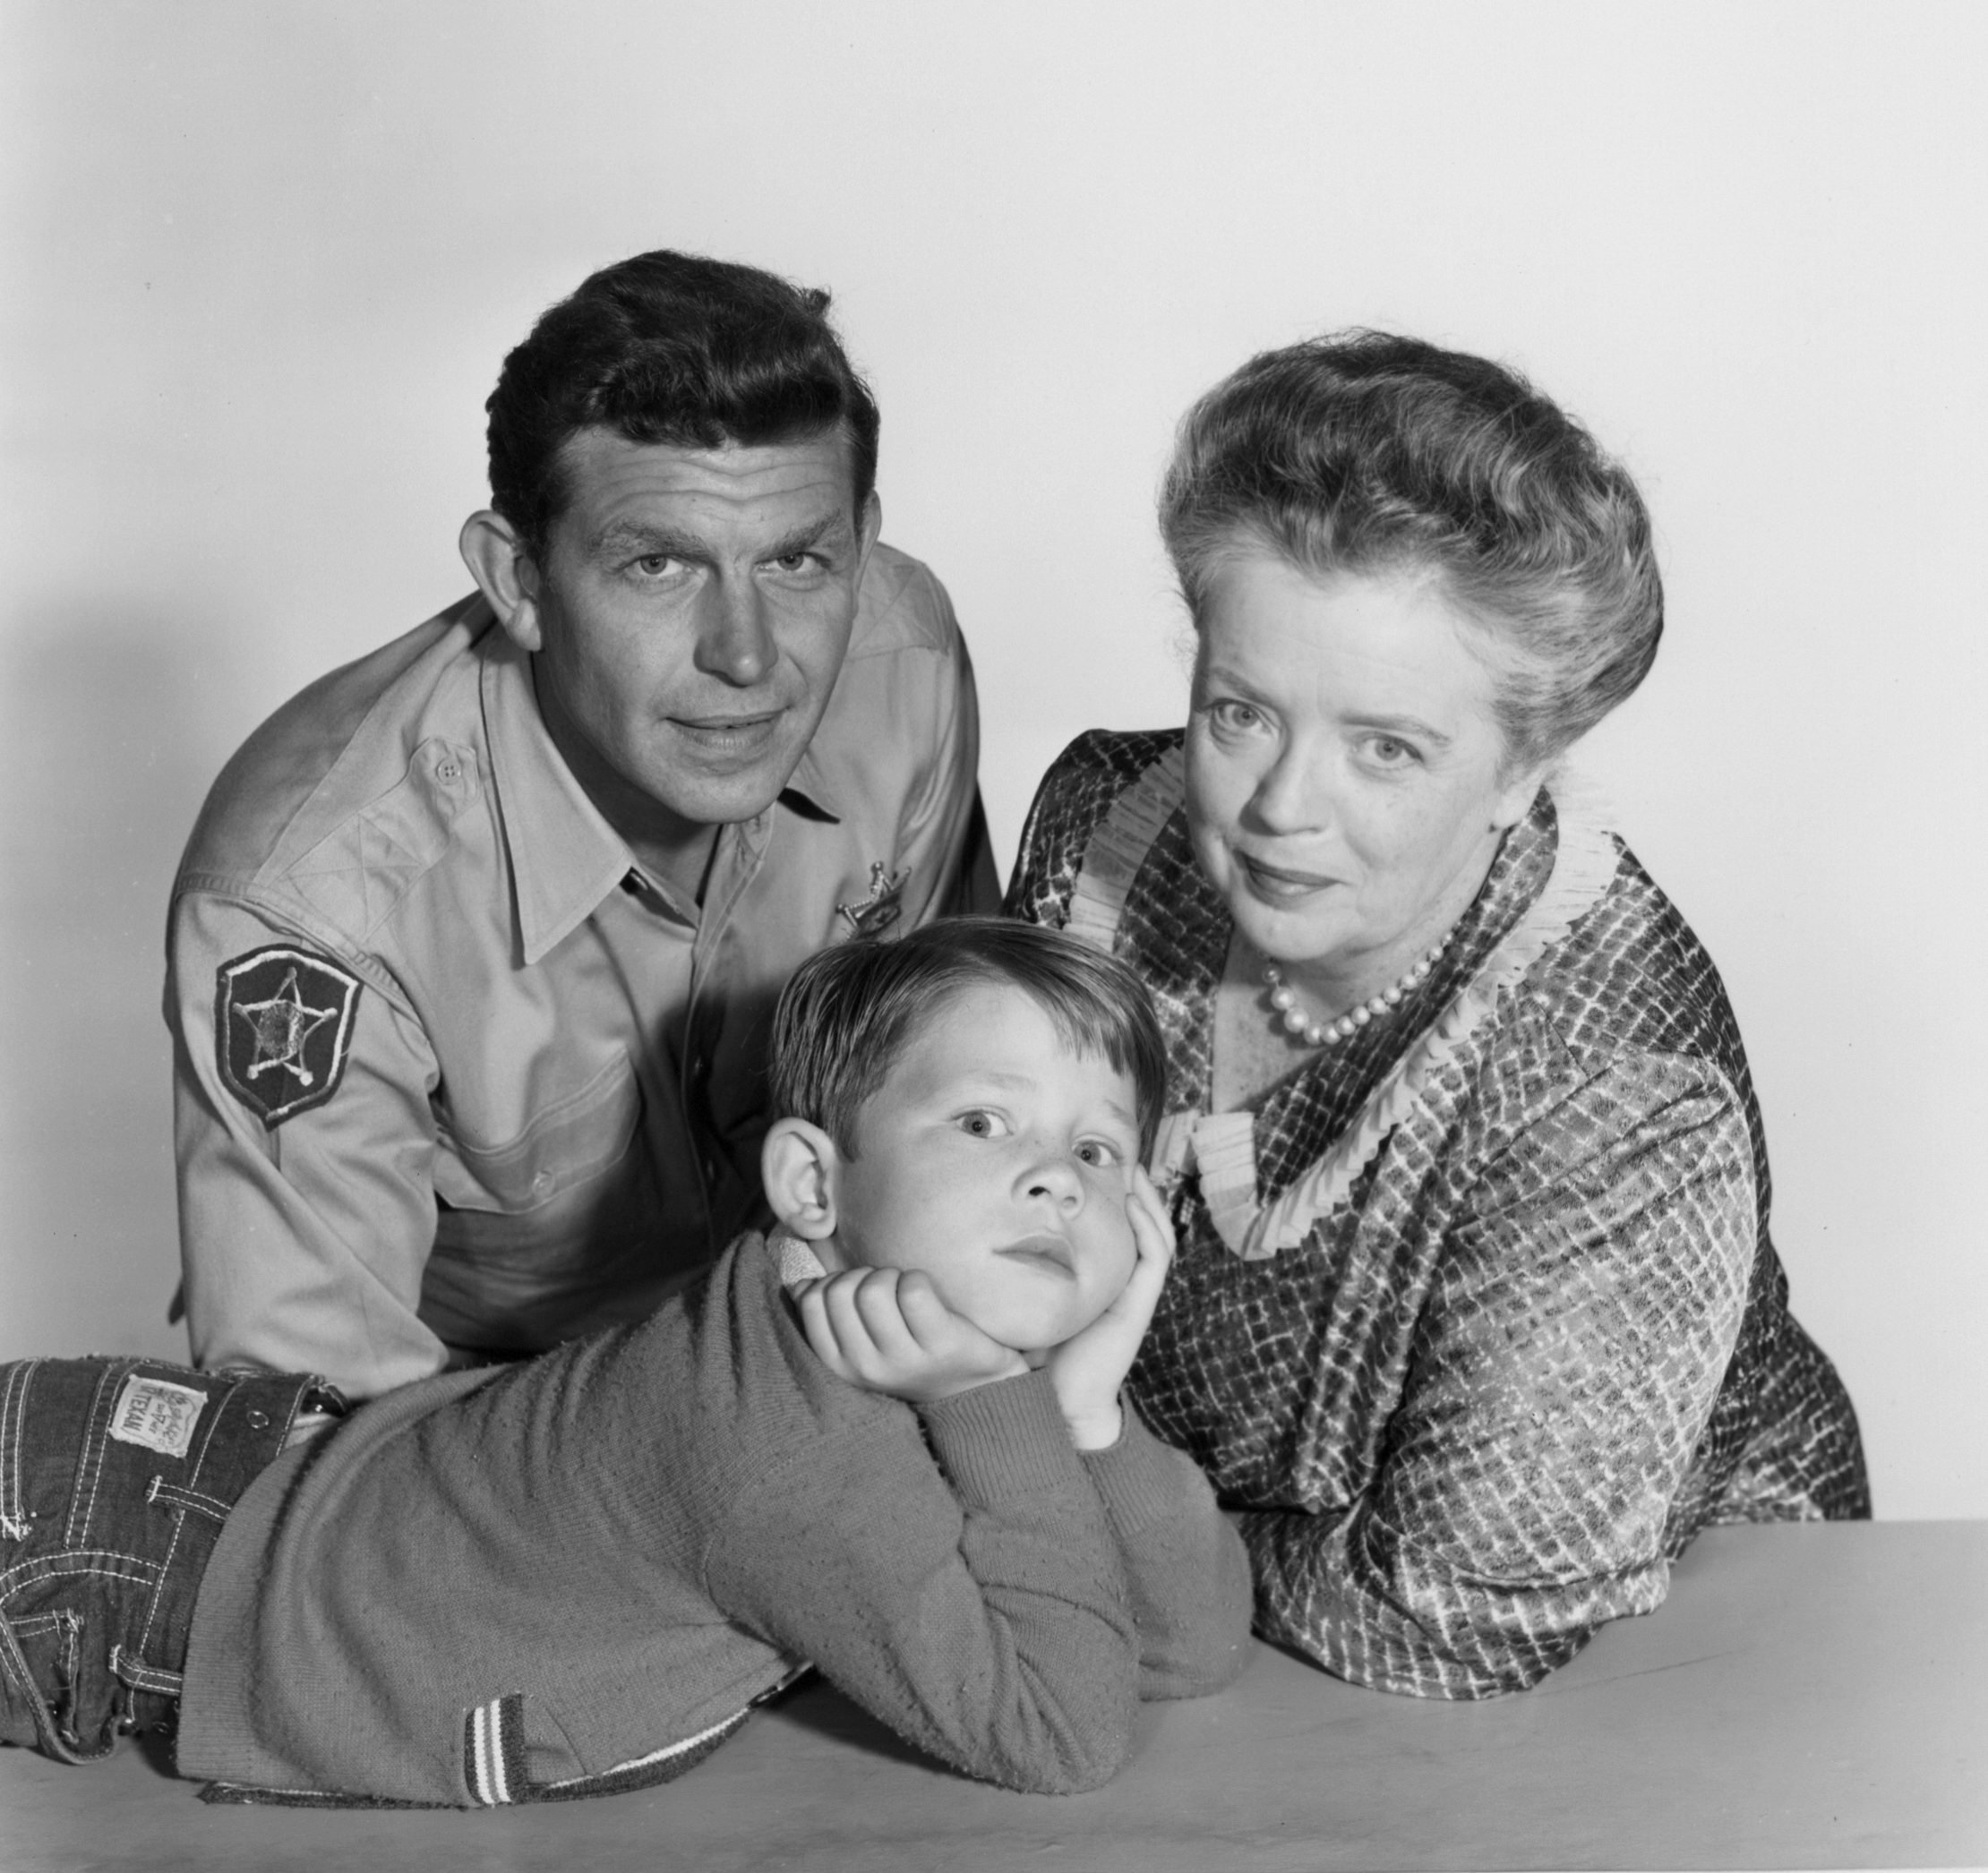 Andy Griffith, Ron Howard, and Frances Bavier near a counter